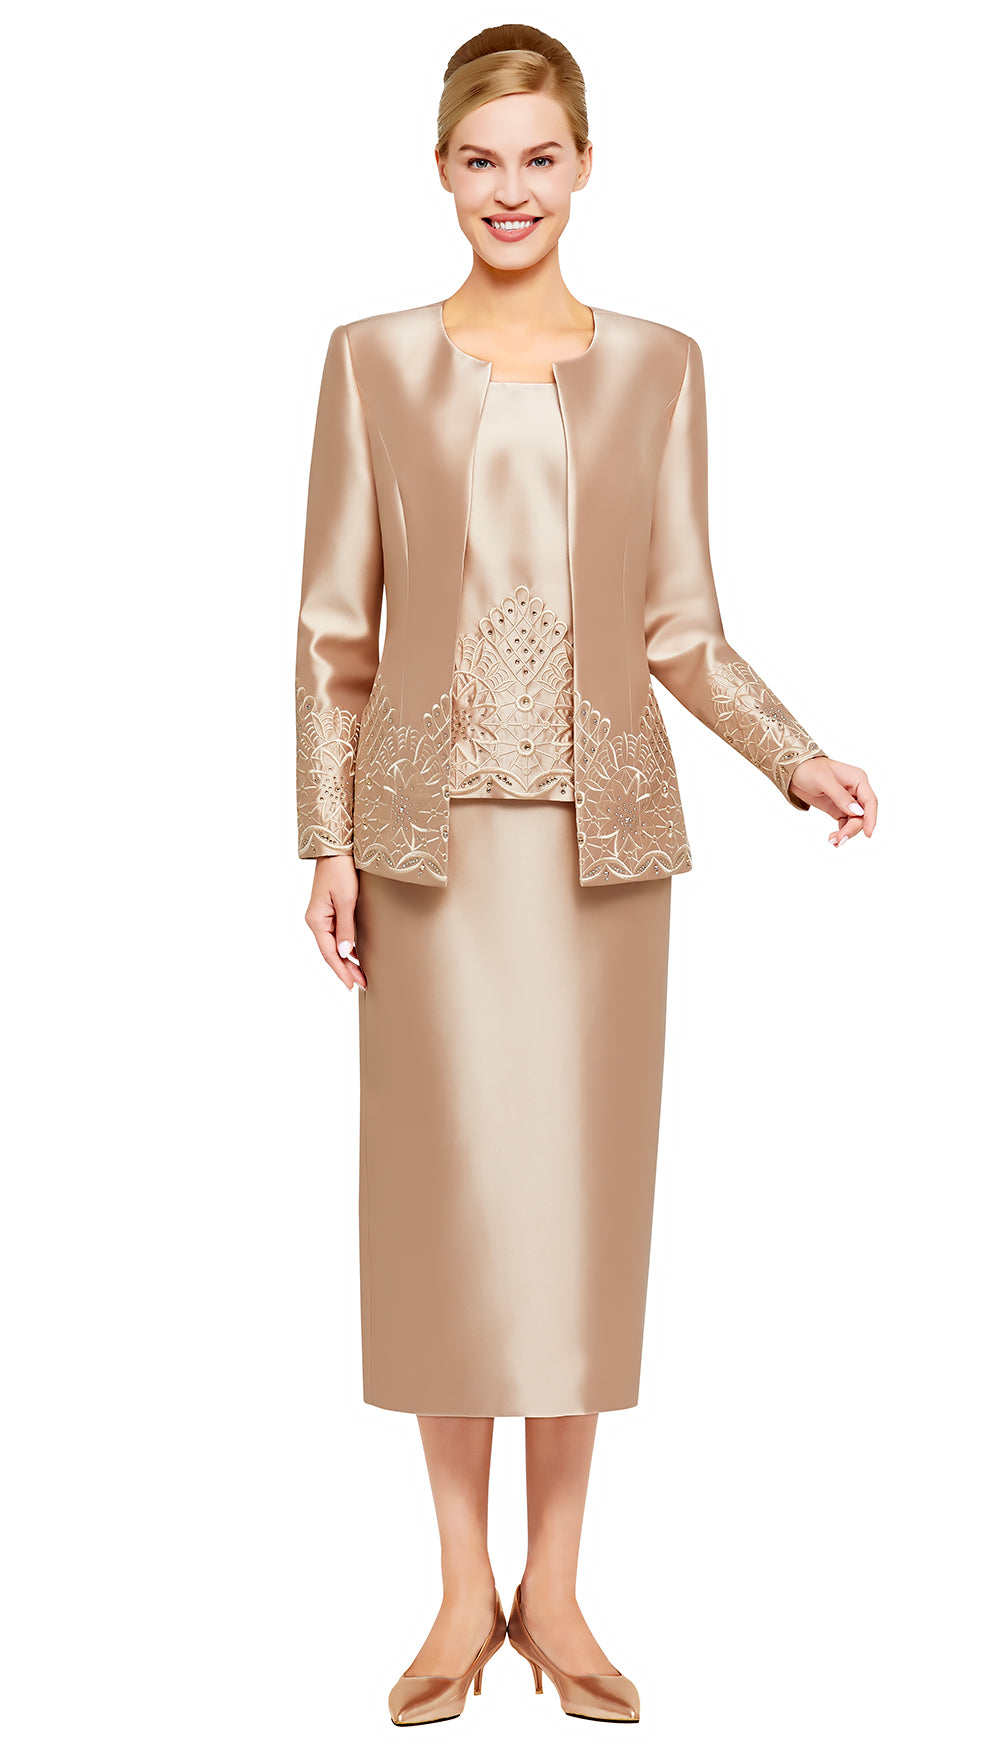 Nina Massini Church Suit 2485-Champagne - Church Suits For Less